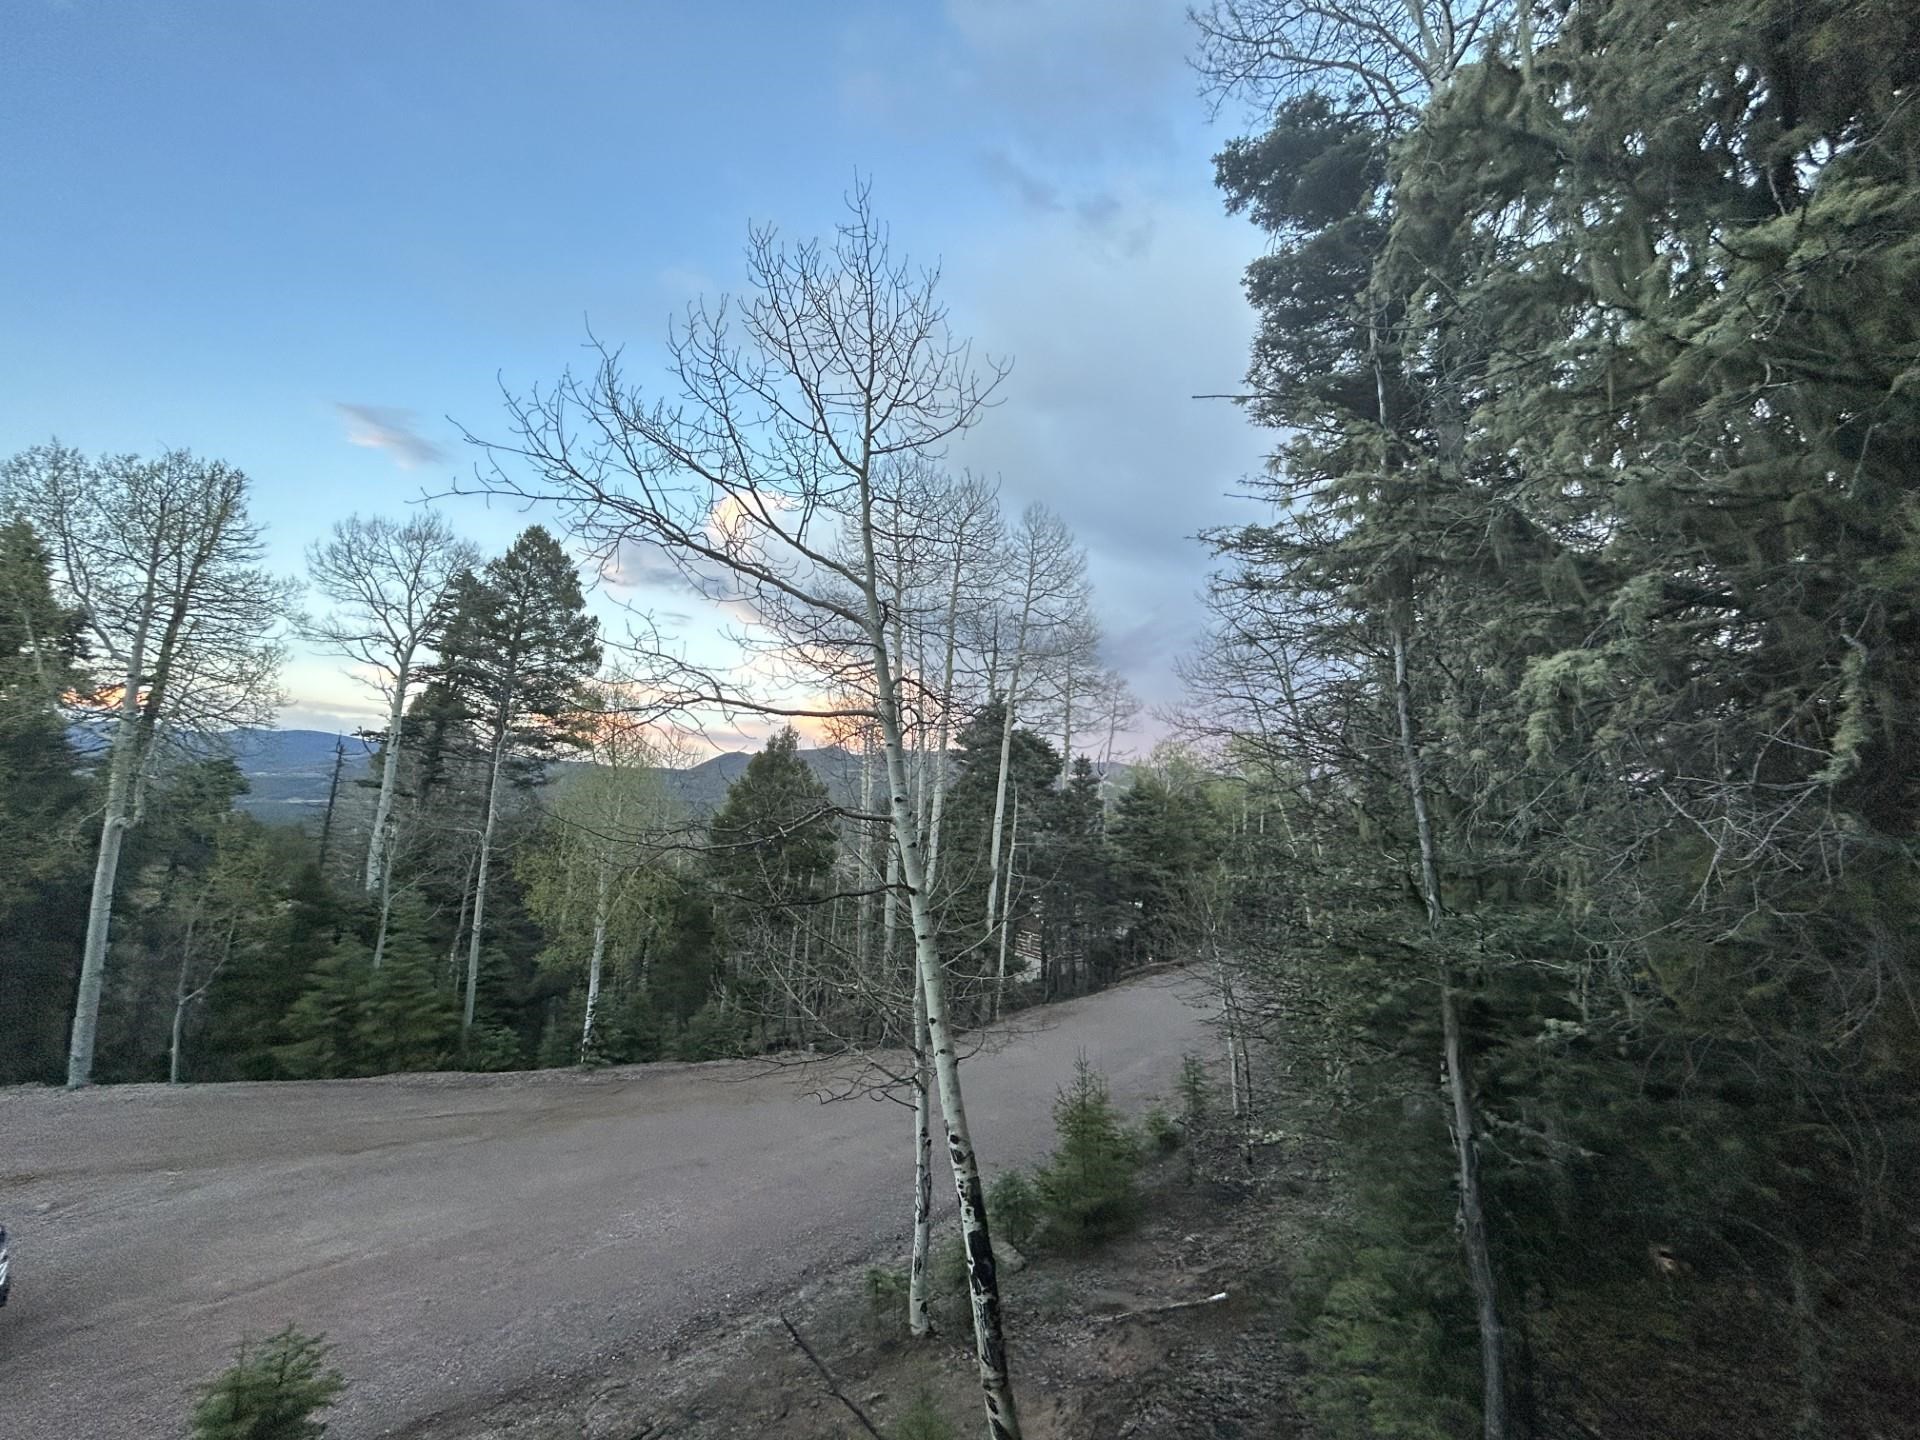 Beautiful lot with views of the ski mountain. Located in the center of town just minutes to the Angel Fire Resort ski-mountain, and just minutes from other resort amenities including the PGA rated golf course, hiking trails, trout-stocked lake, country club, gym, tennis/pickleball courts and a nationally recognized mountain bike terrain park.